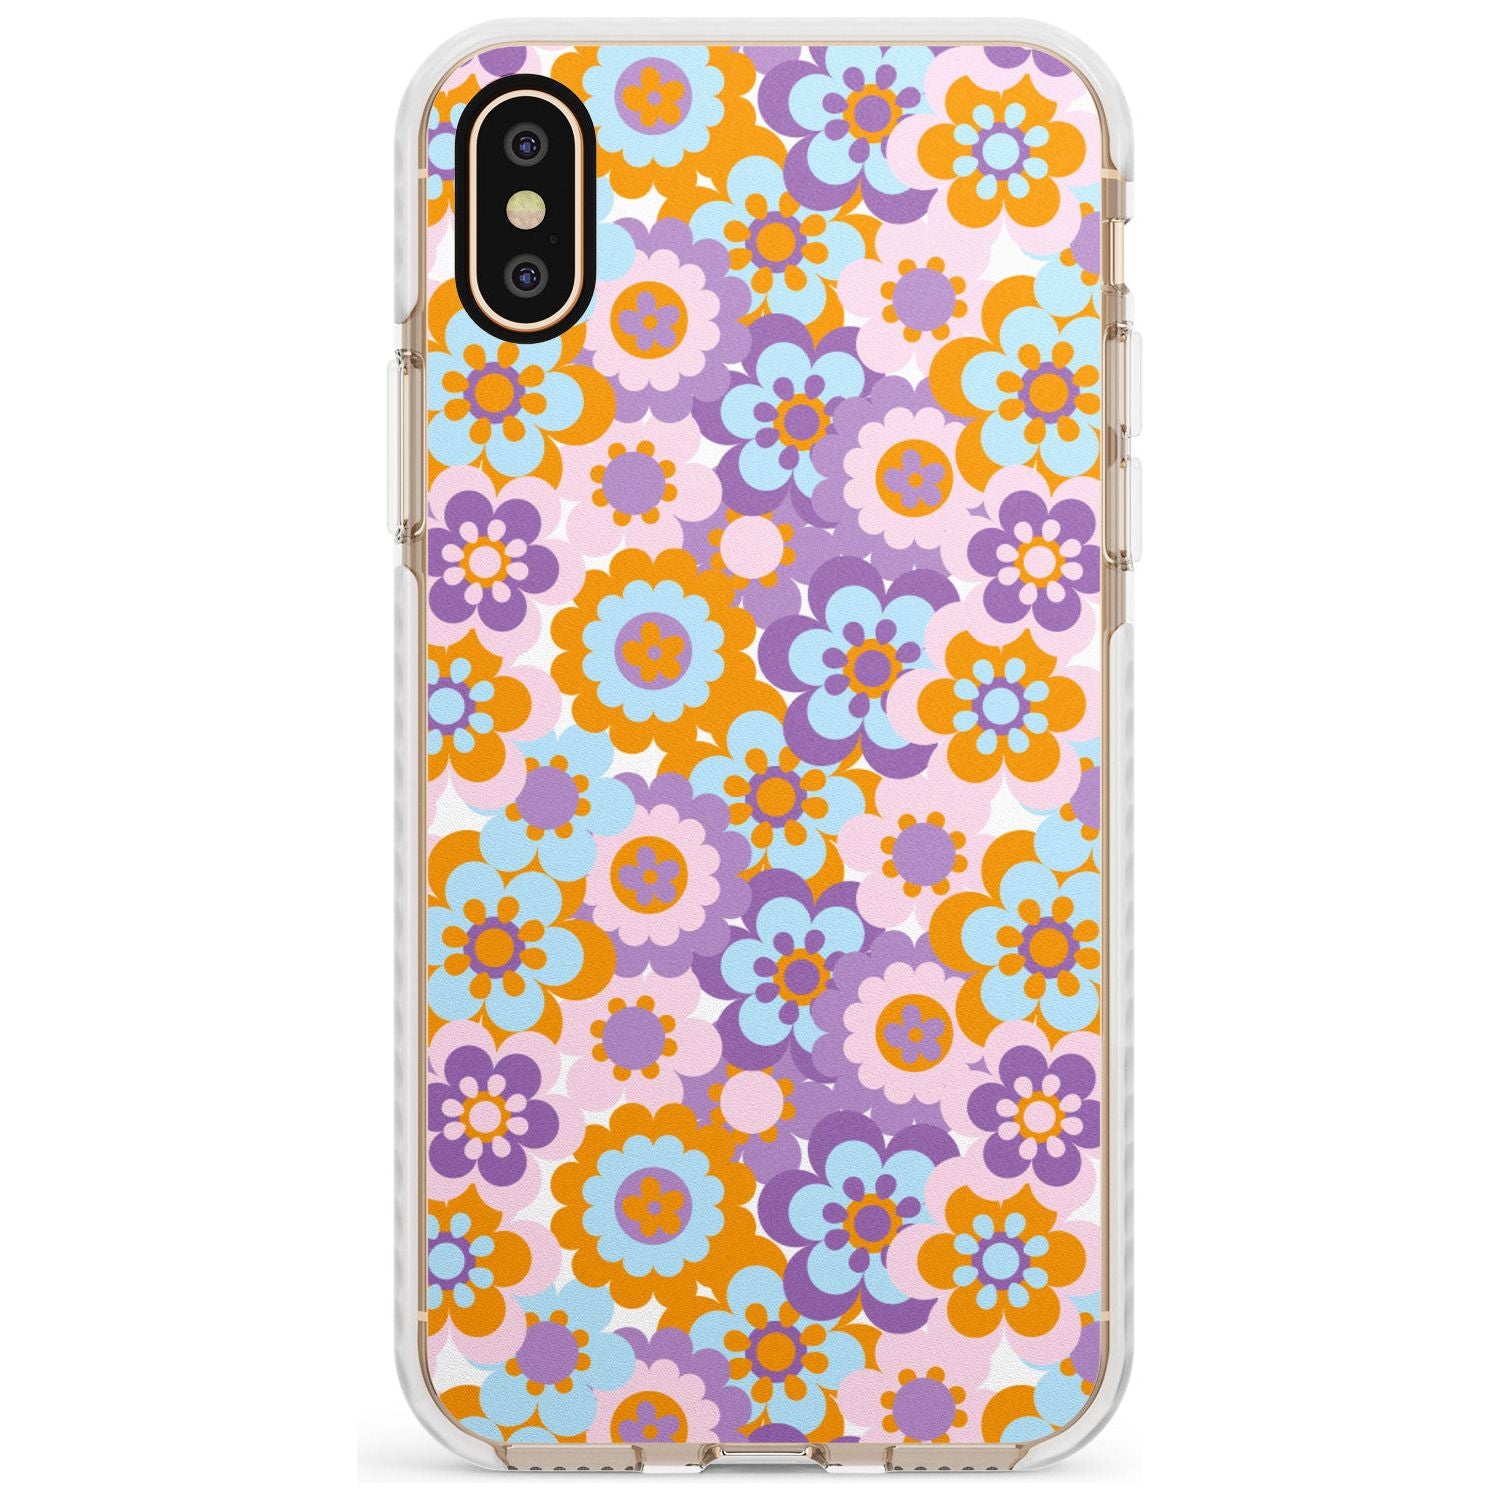 Flower Power Pattern Impact Phone Case for iPhone X XS Max XR